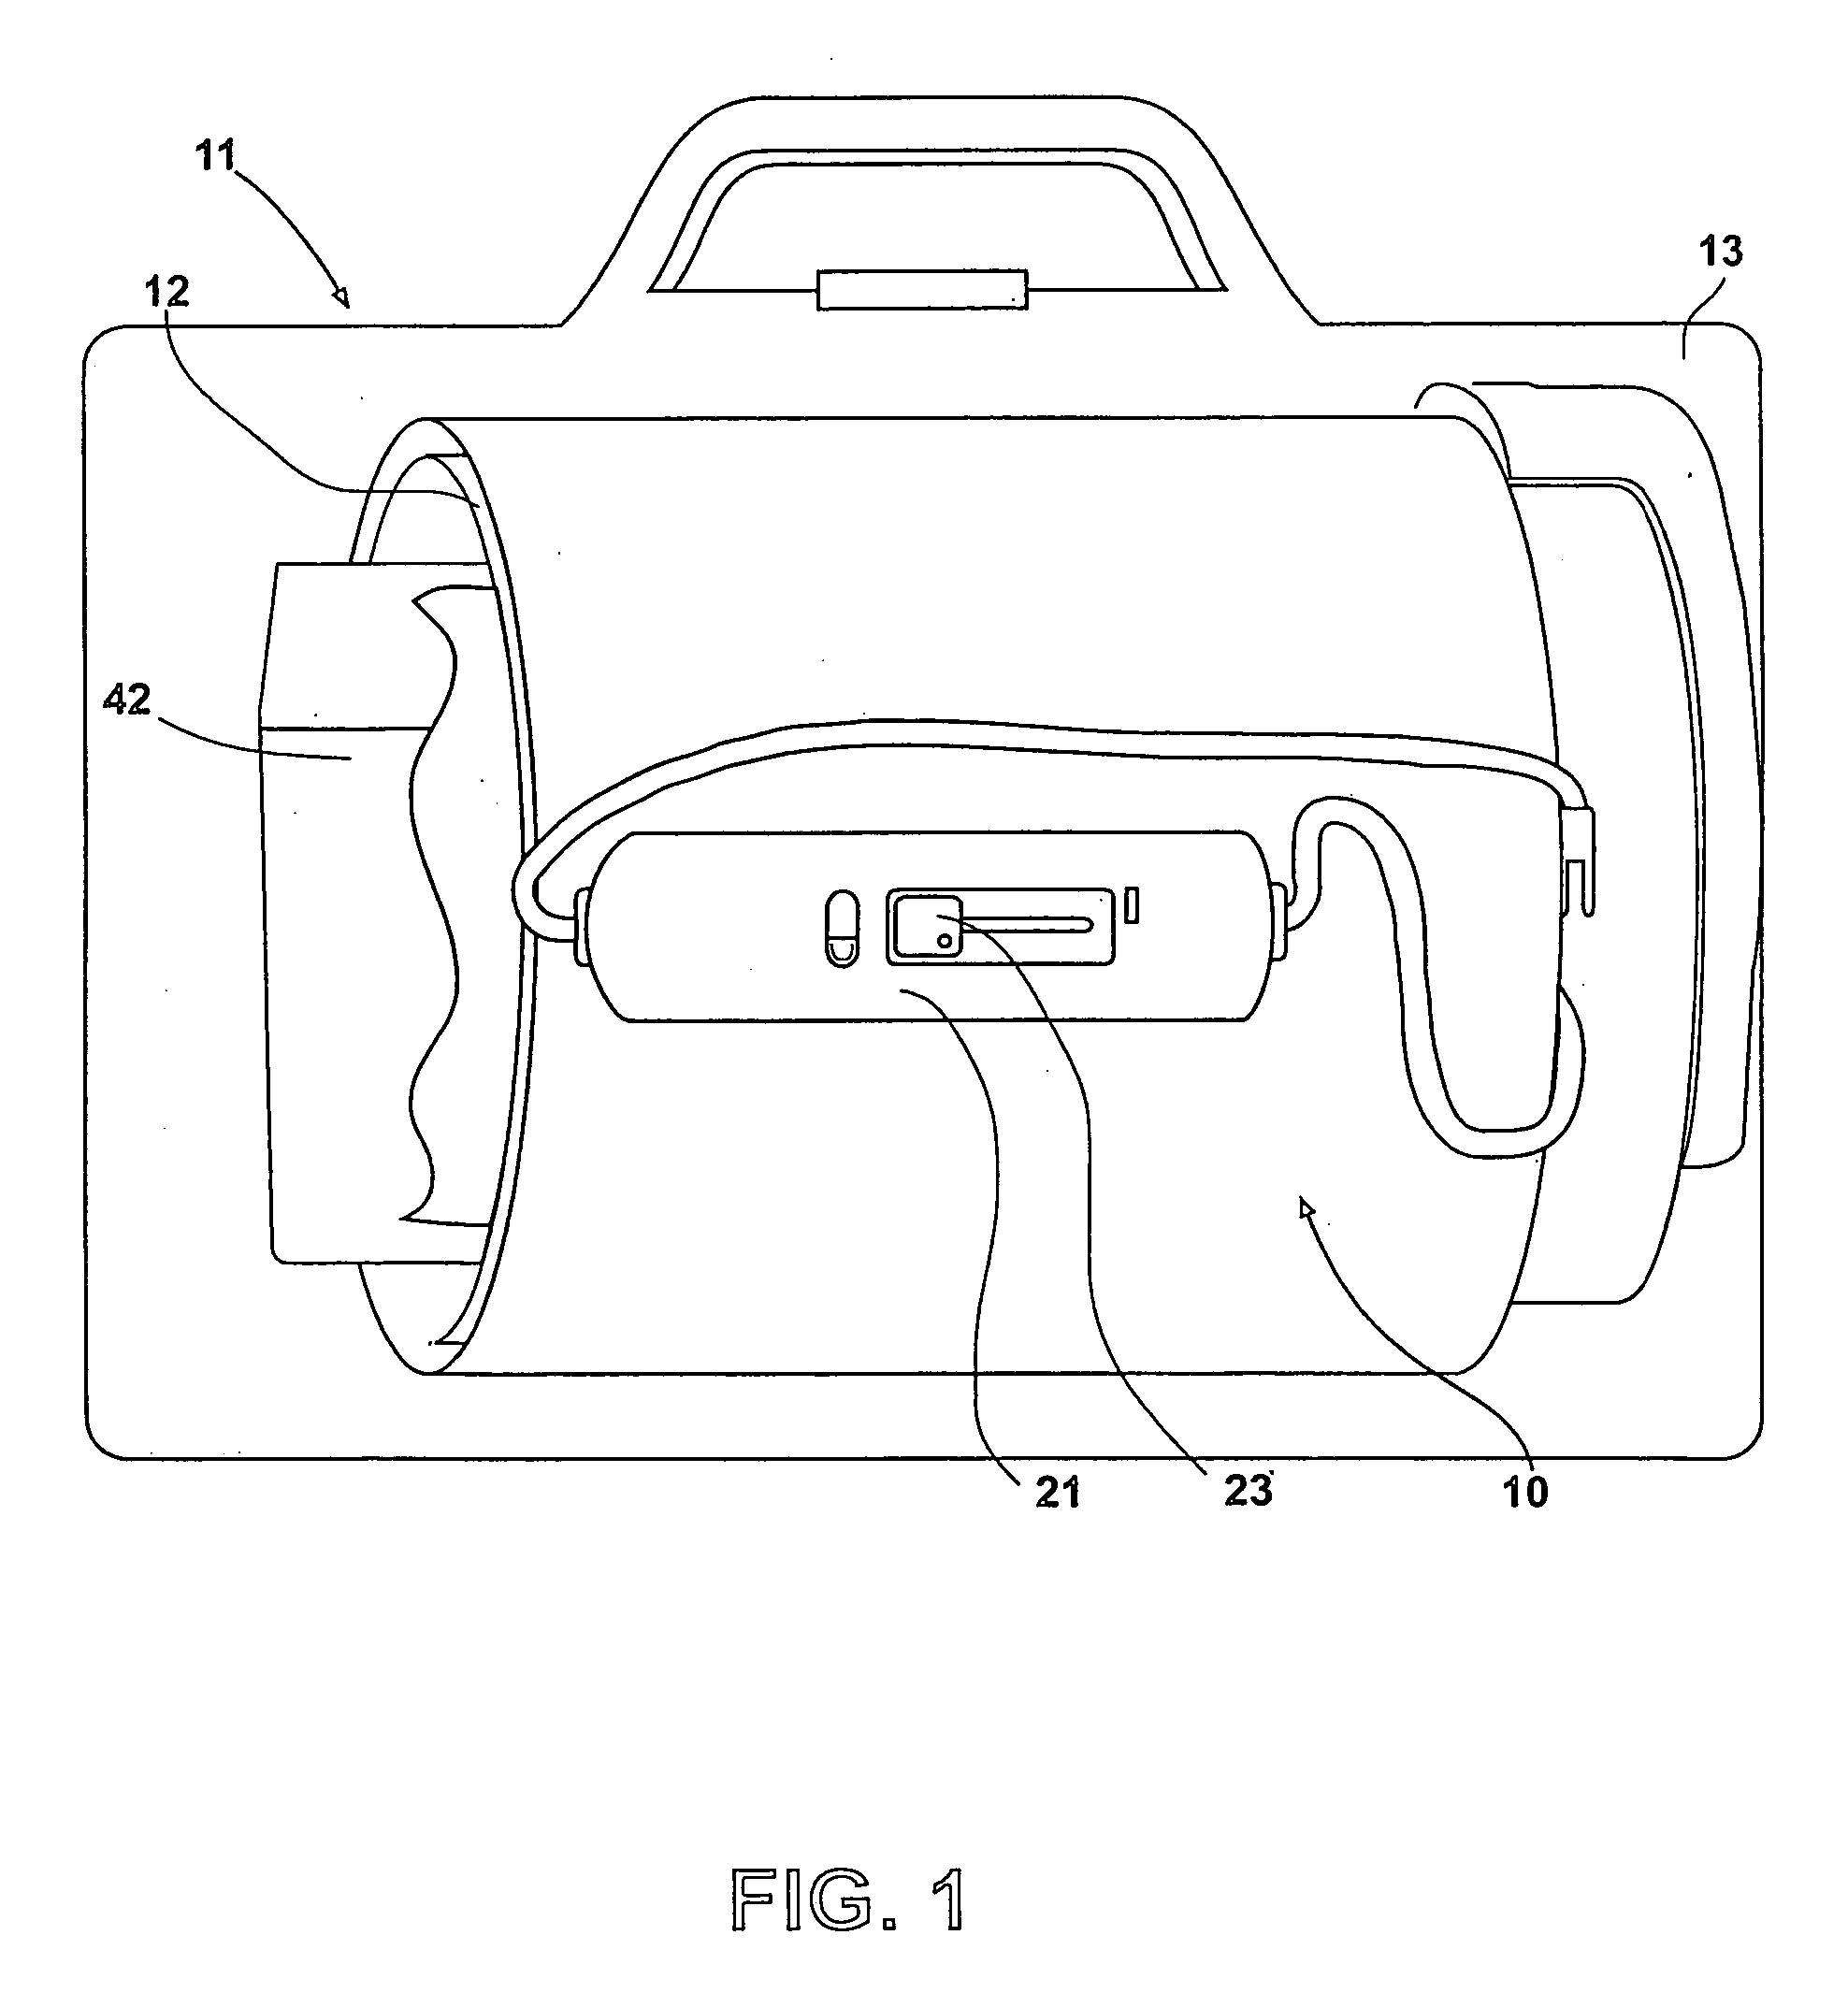 Body tissue and skin treatment method using pulsing heating pad and topical cream